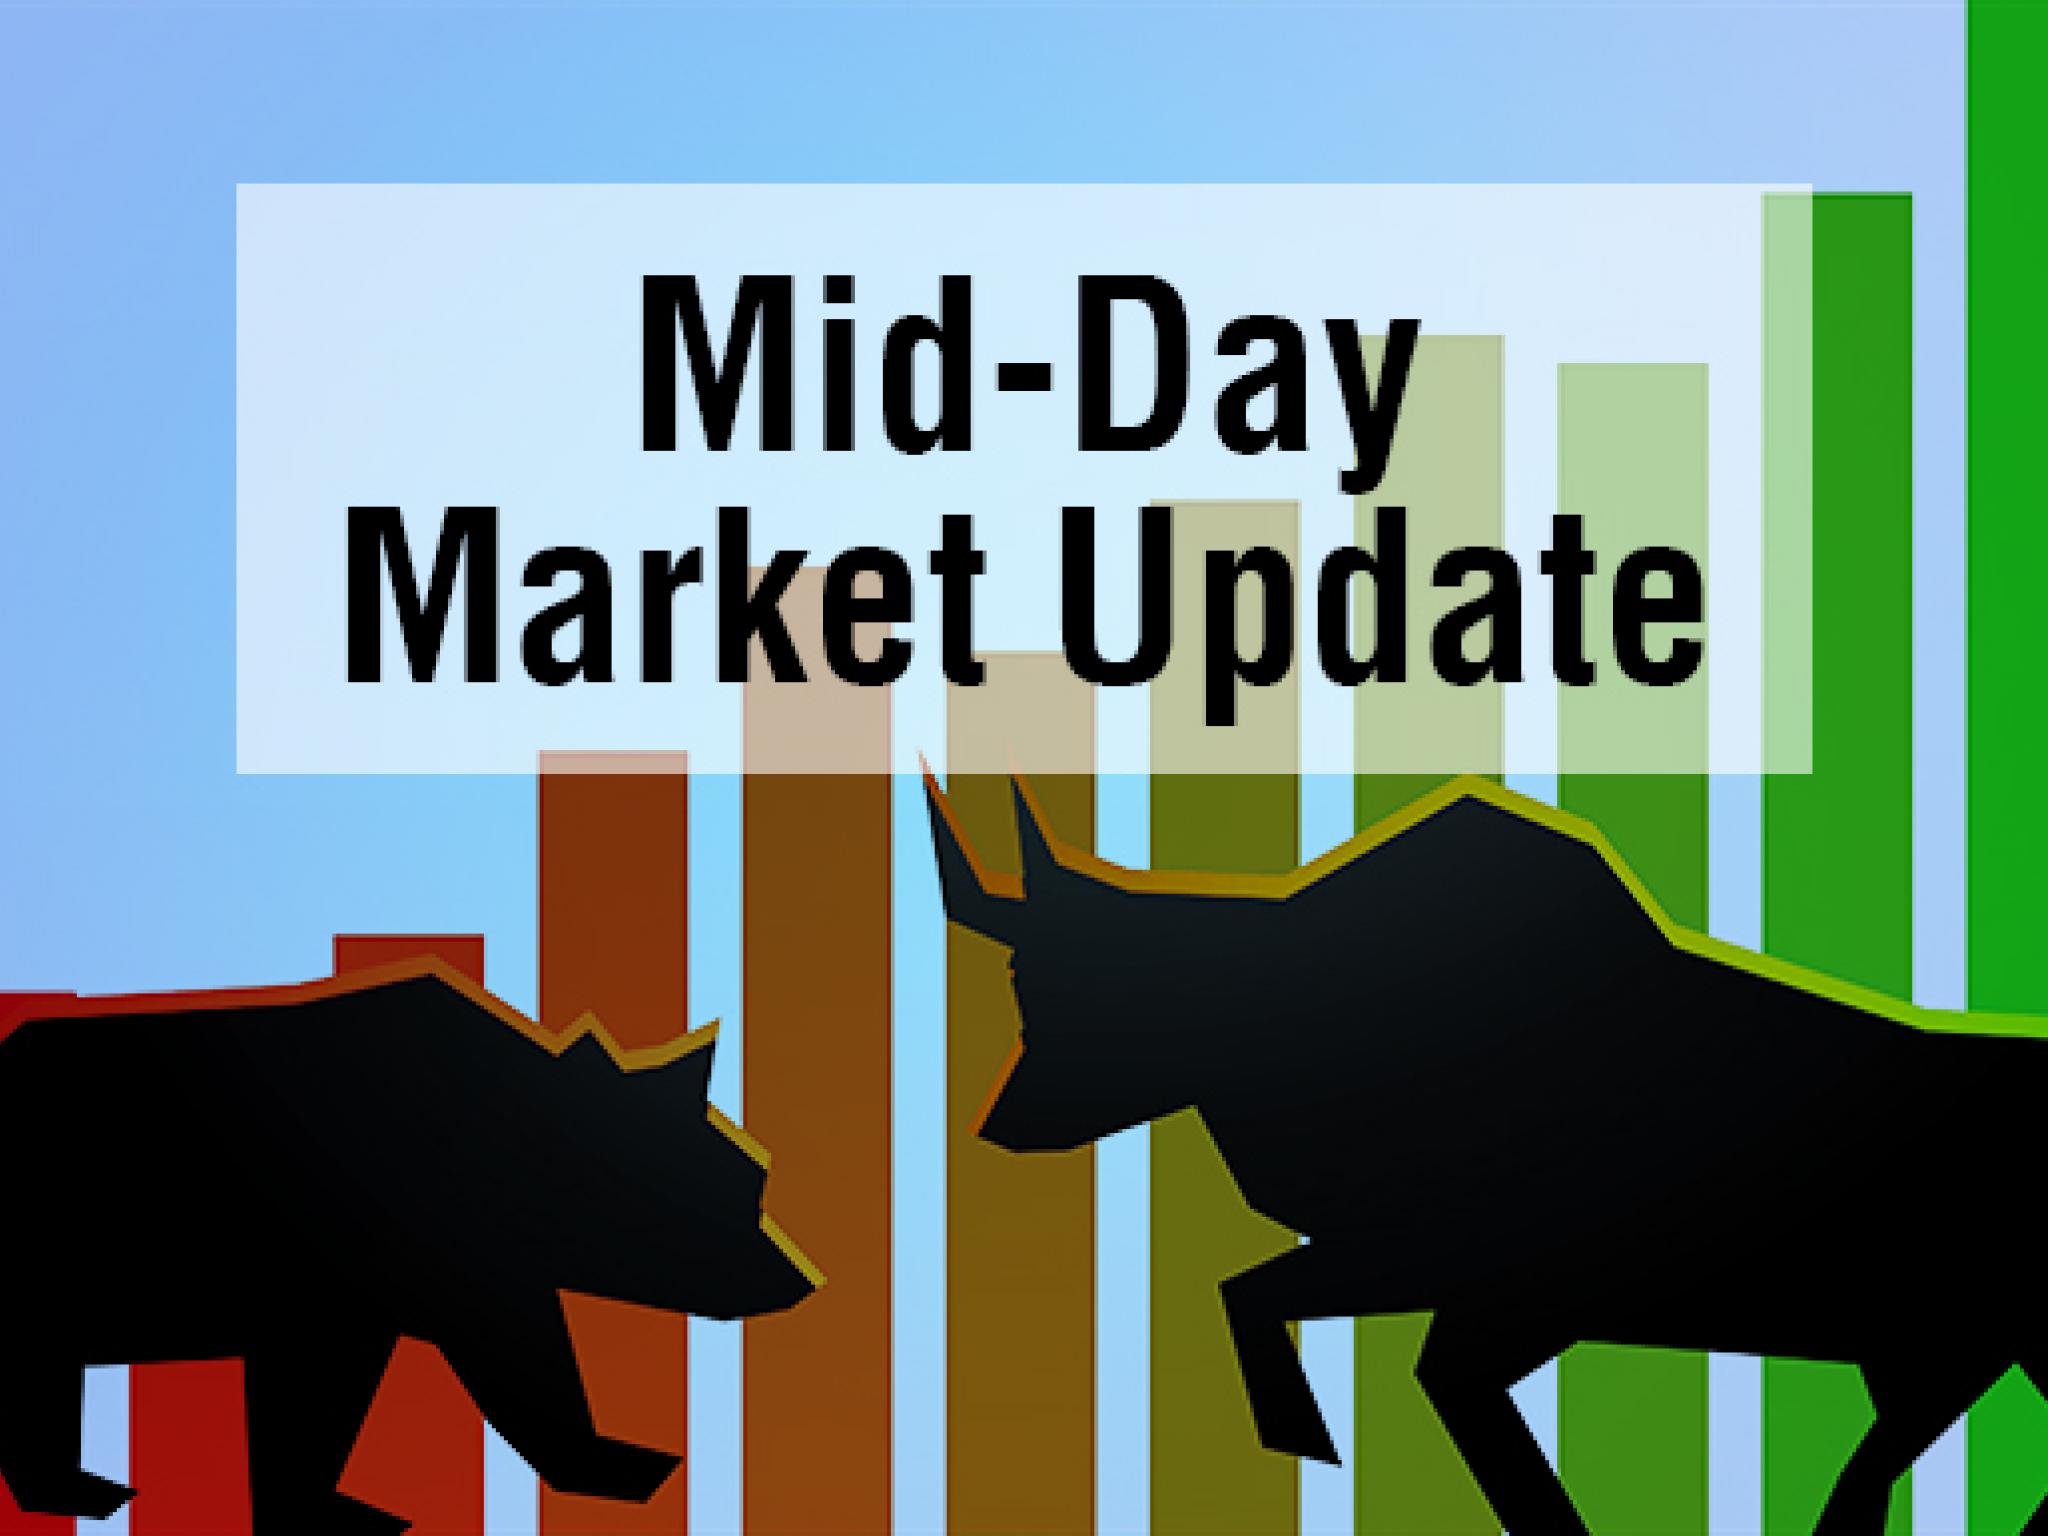  mid-day-market-update-tristate-capital-jumps-following-acquisition-news-covenant-logistics-group-shares-slide 